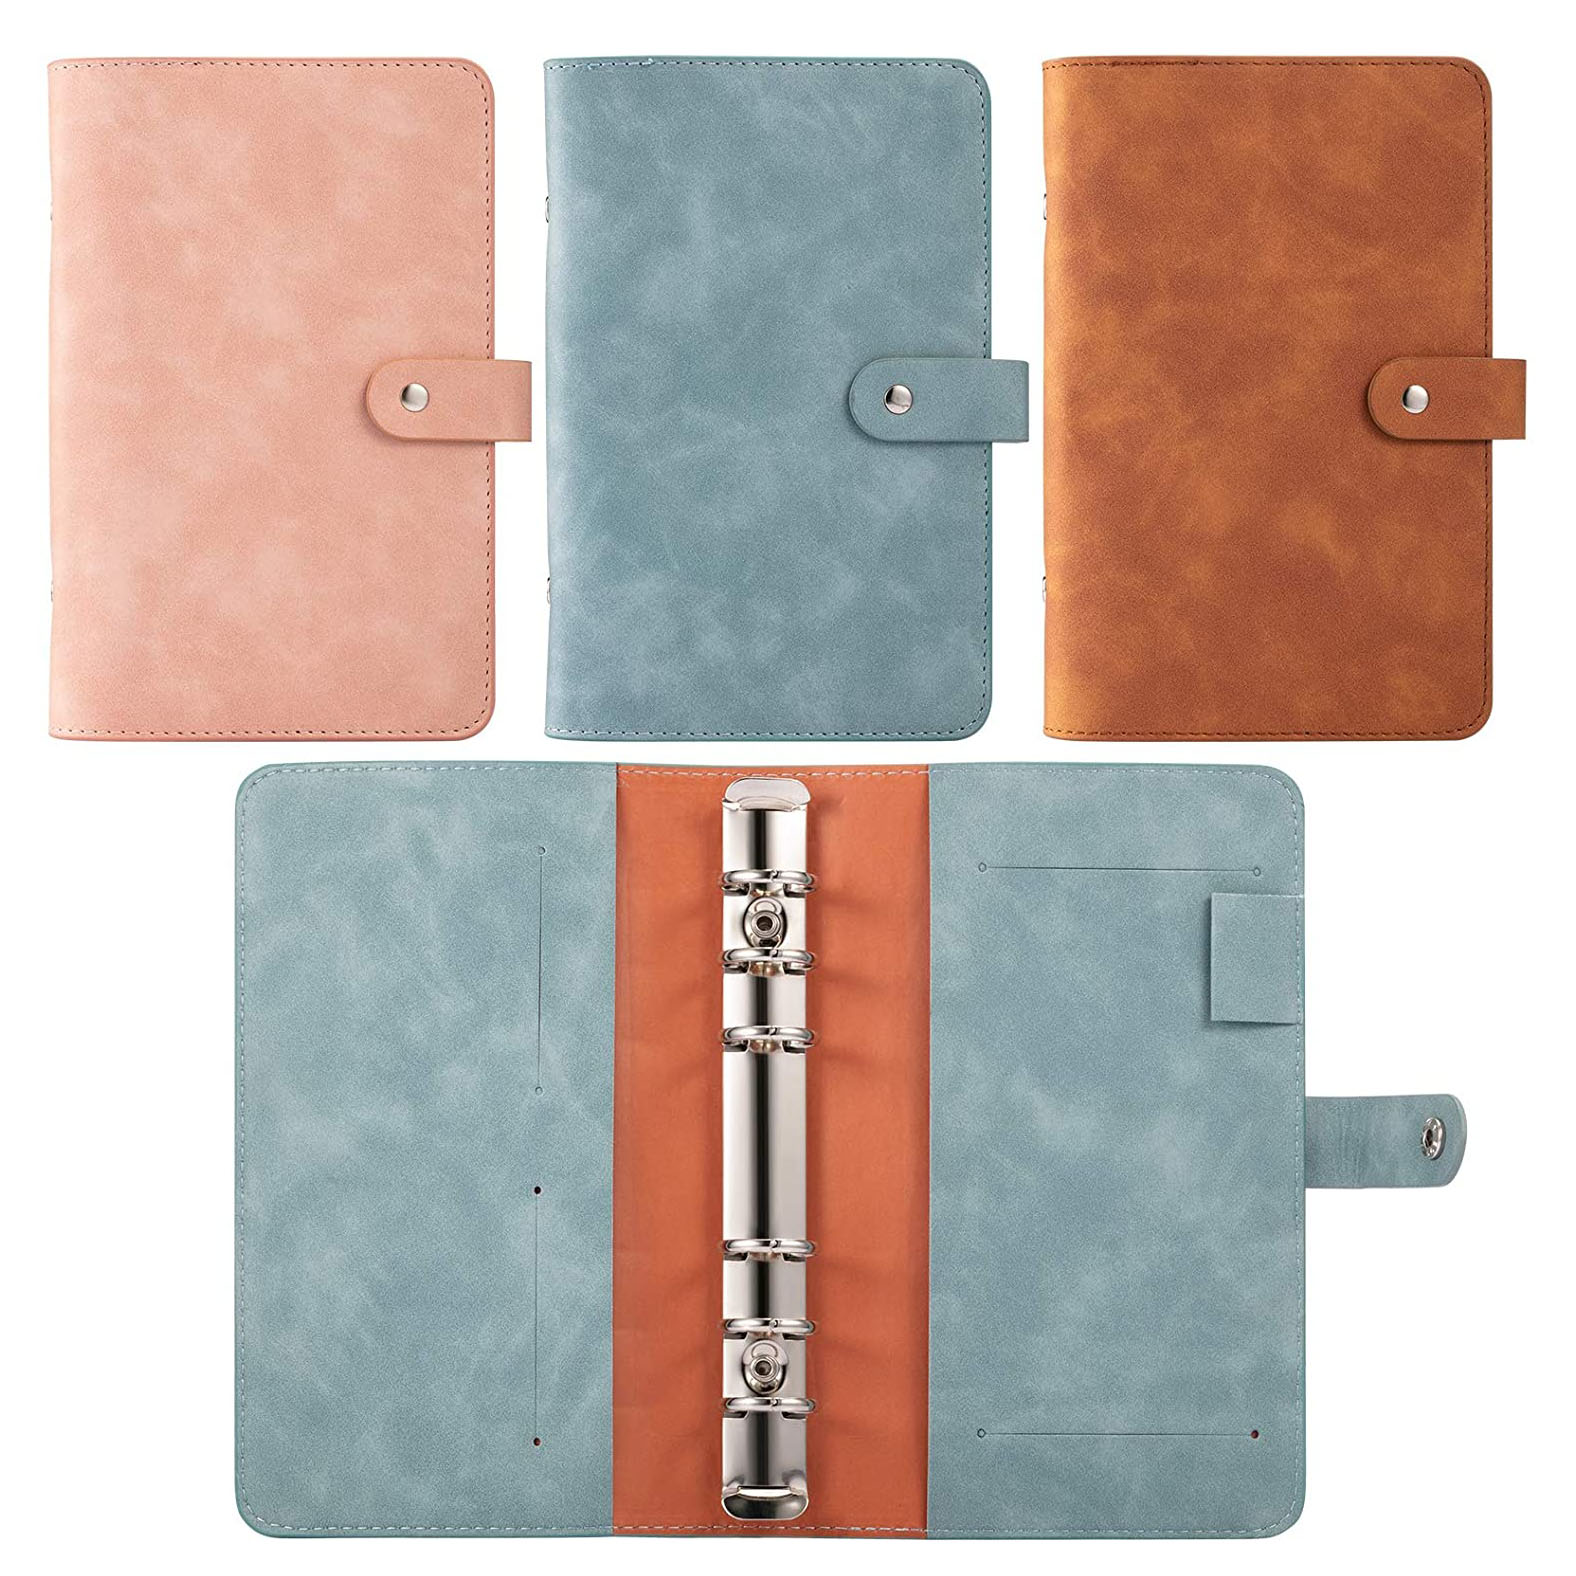 A6 PU Leather Binder Cover,Refillable 6 Ring Notebook for A6 Filler Paper Personal Planning BinderMagnetic Buckle Closure